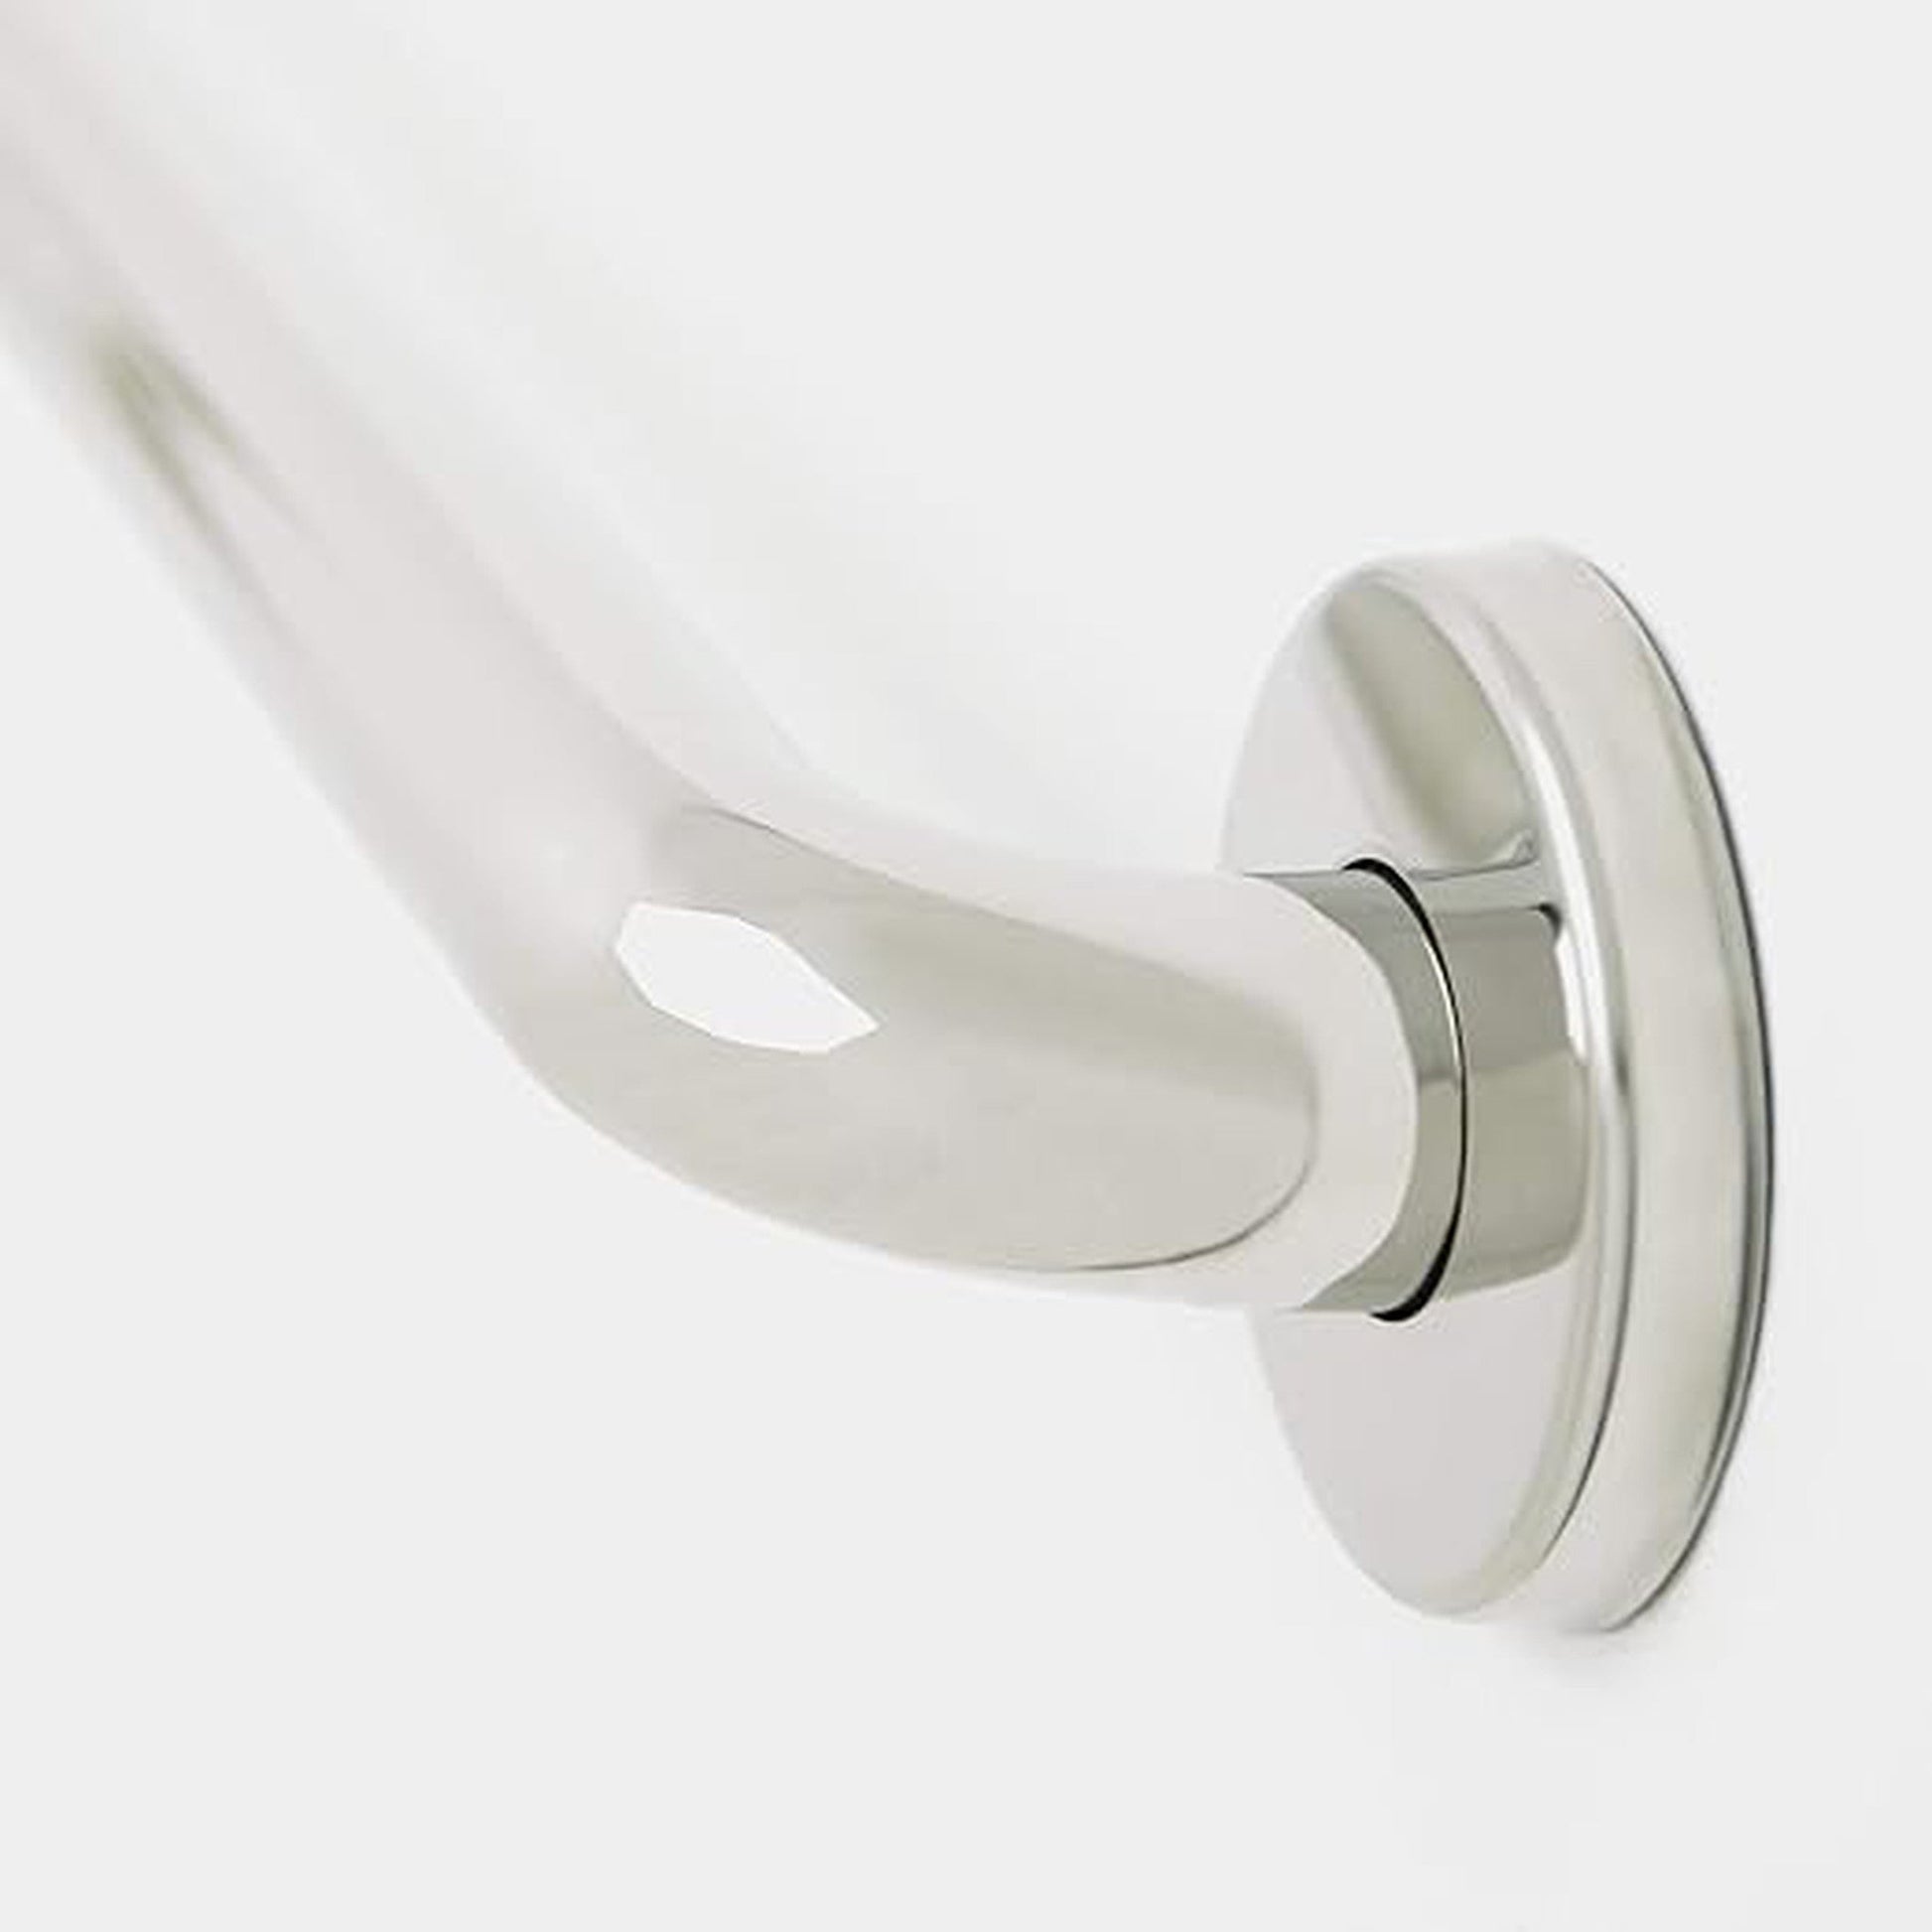 Seachrome Signature Series Value Line 30" Polished Stainless Steel 1.5" Tube Diameter Straight Concealed Flange Grab Bar